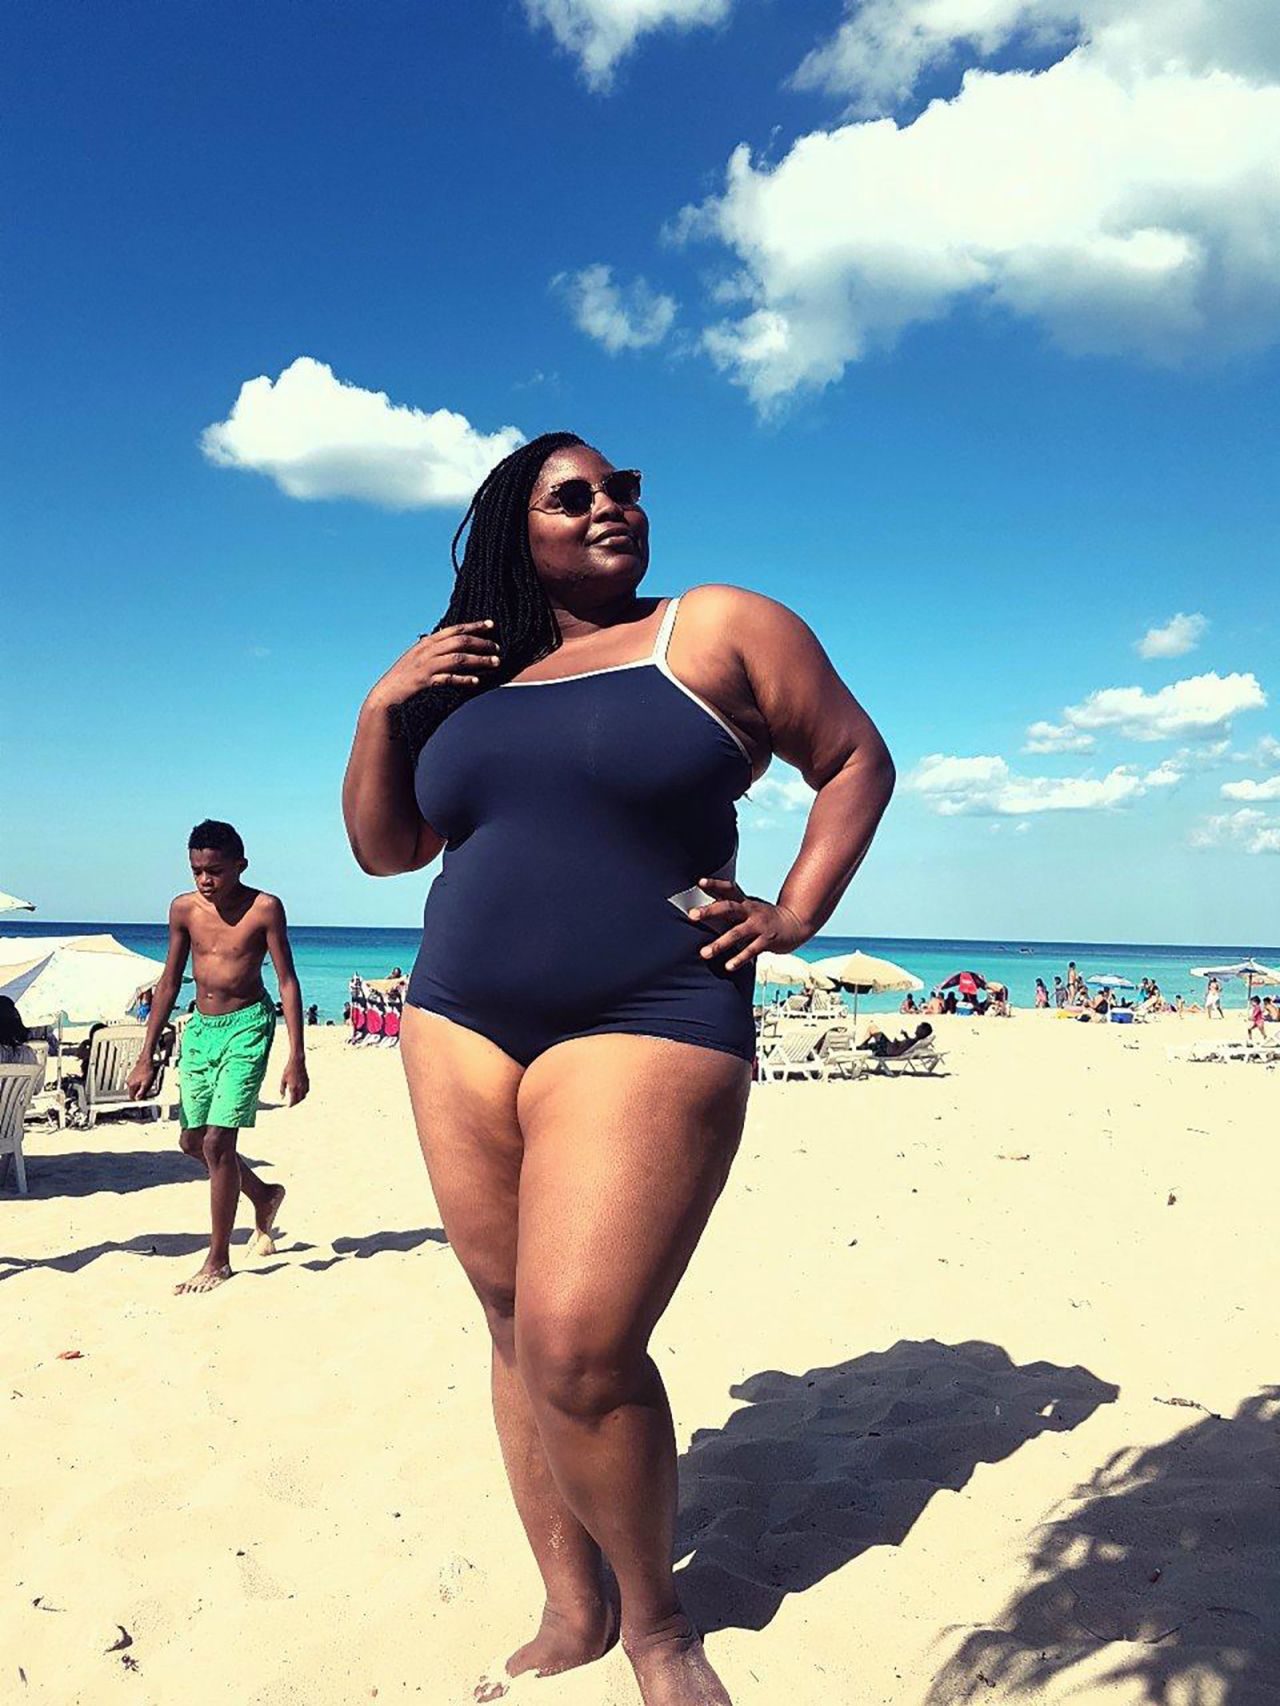 The image of Wana Udobang on a beach in Cuba that went viral